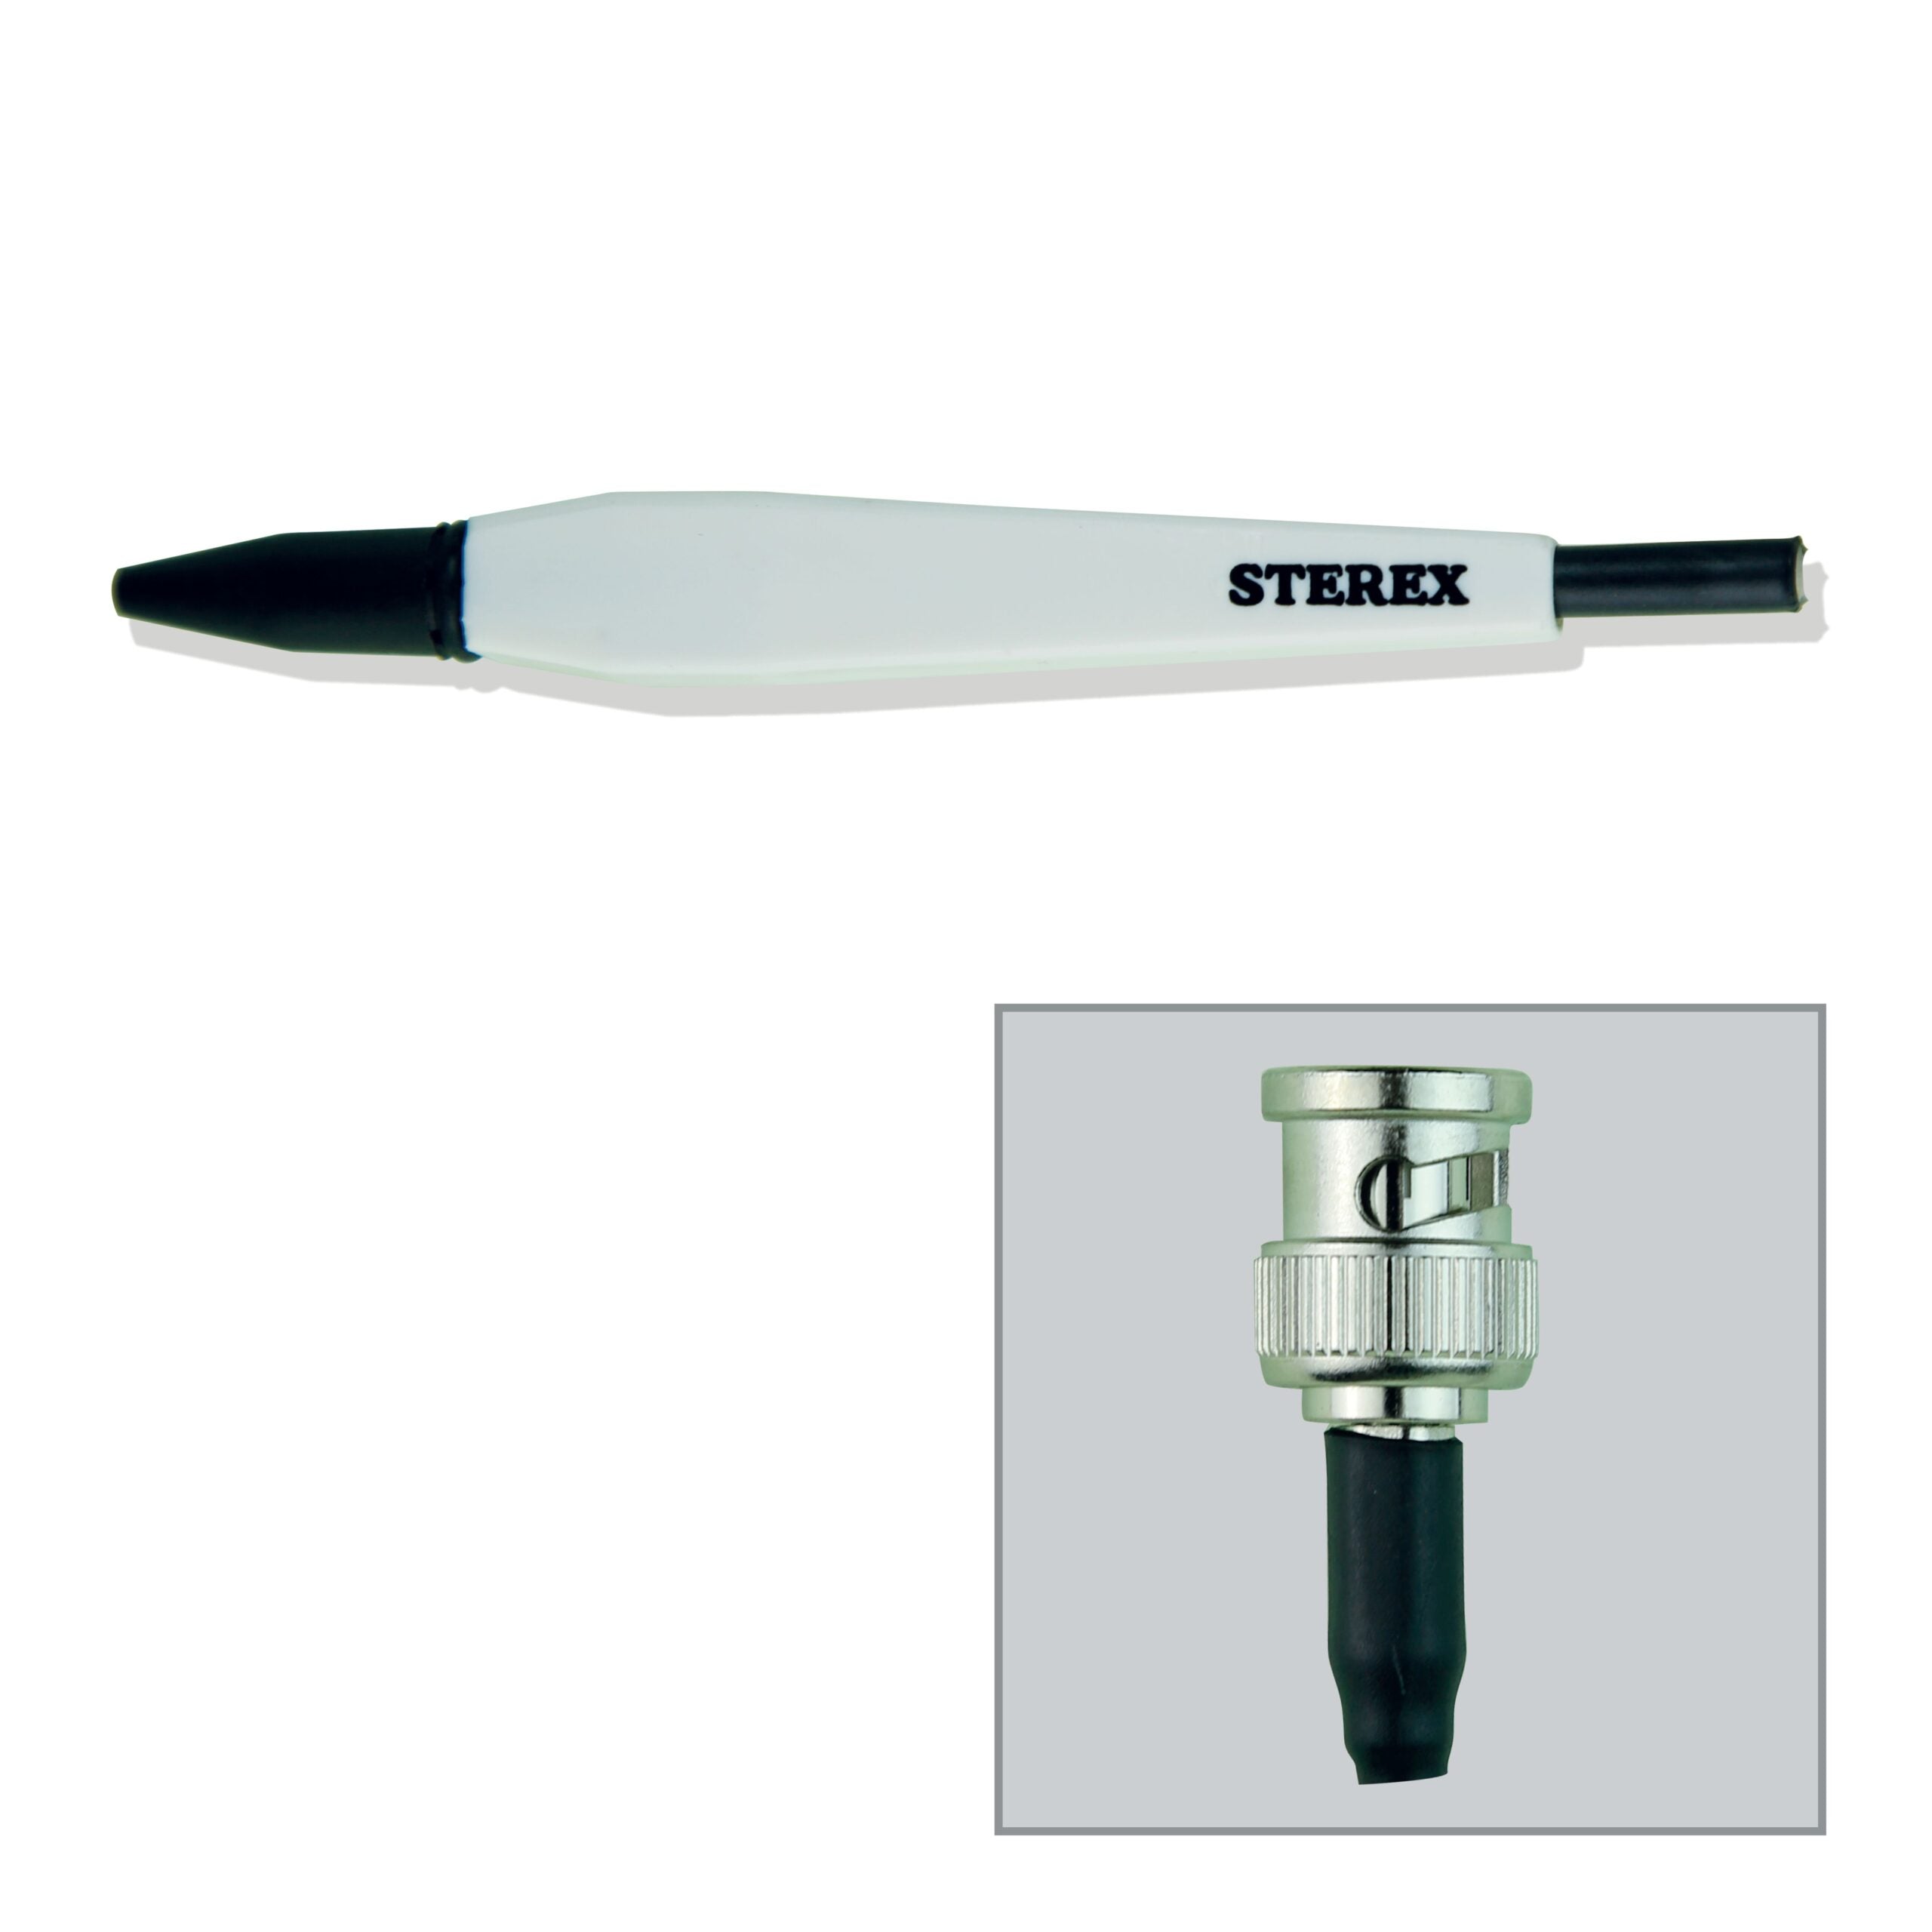 Sterex Needle Holder F - foot control with BNC Cable